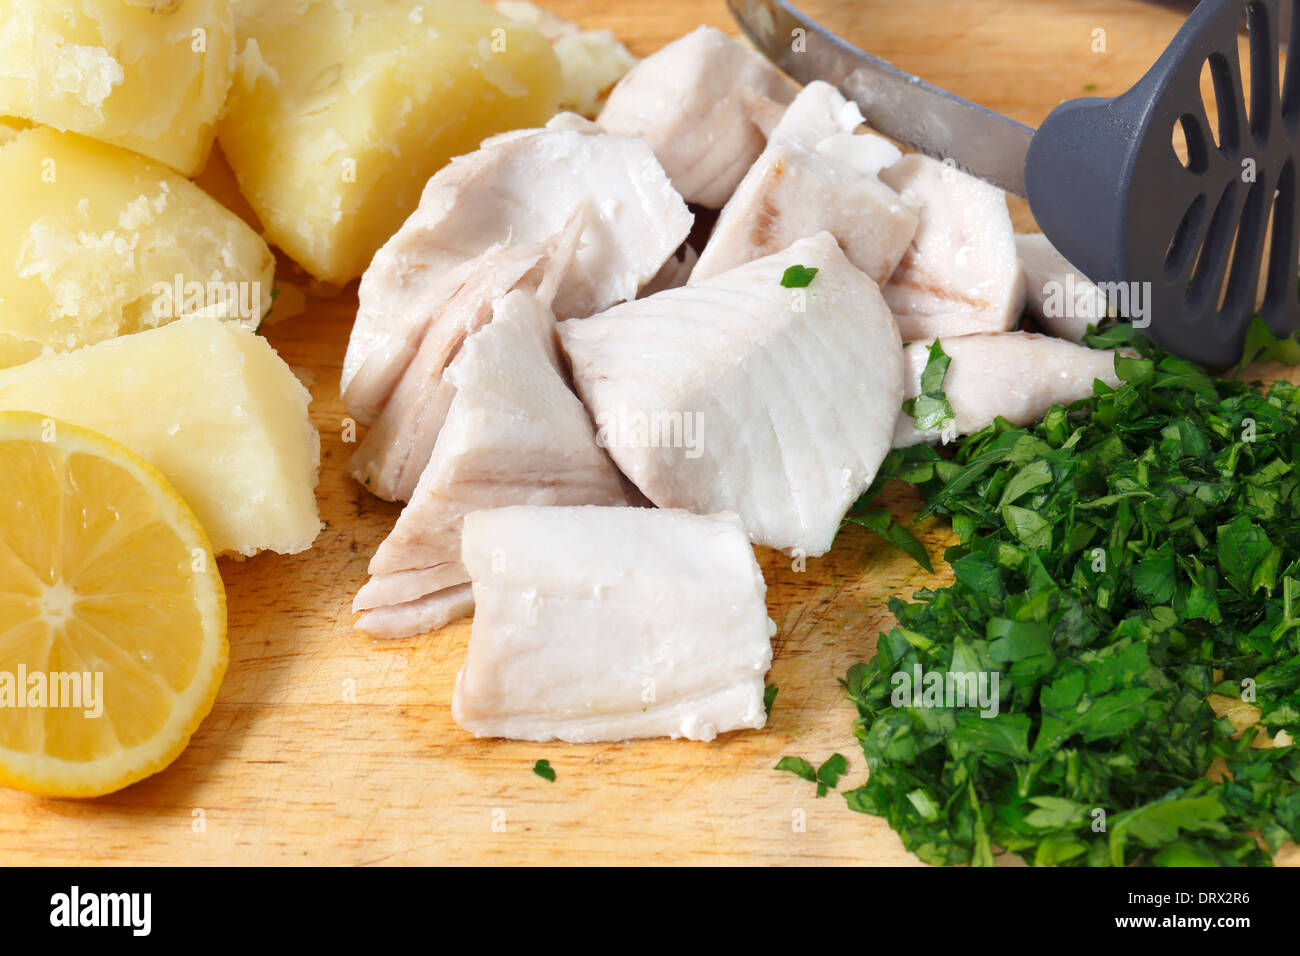 Steamed kingfish chunks with boiled potatoes and parsley, ready to be mashed with lemon peel into homemade fishcake mixture. Stock Photo